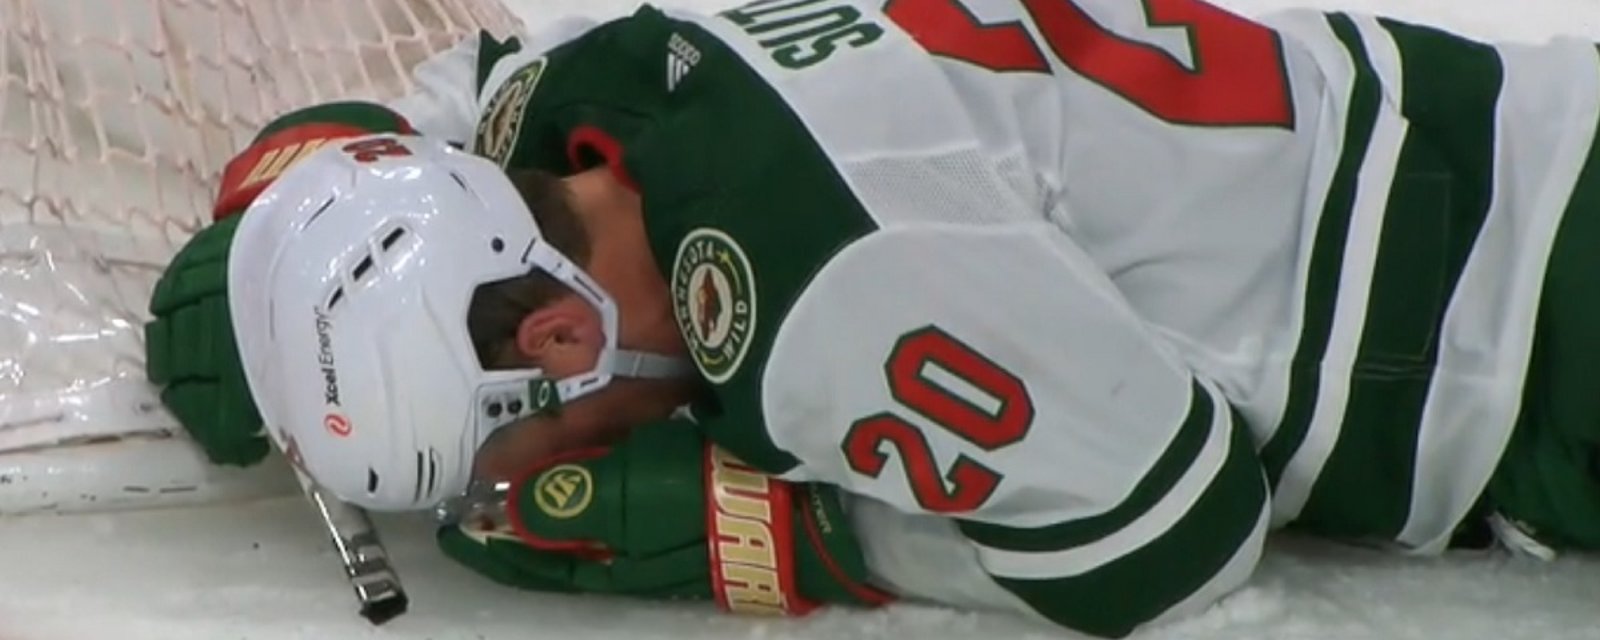 Rumor: NHL Player Safety has ruled on Ryan Reaves' hit to Ryan Suter.